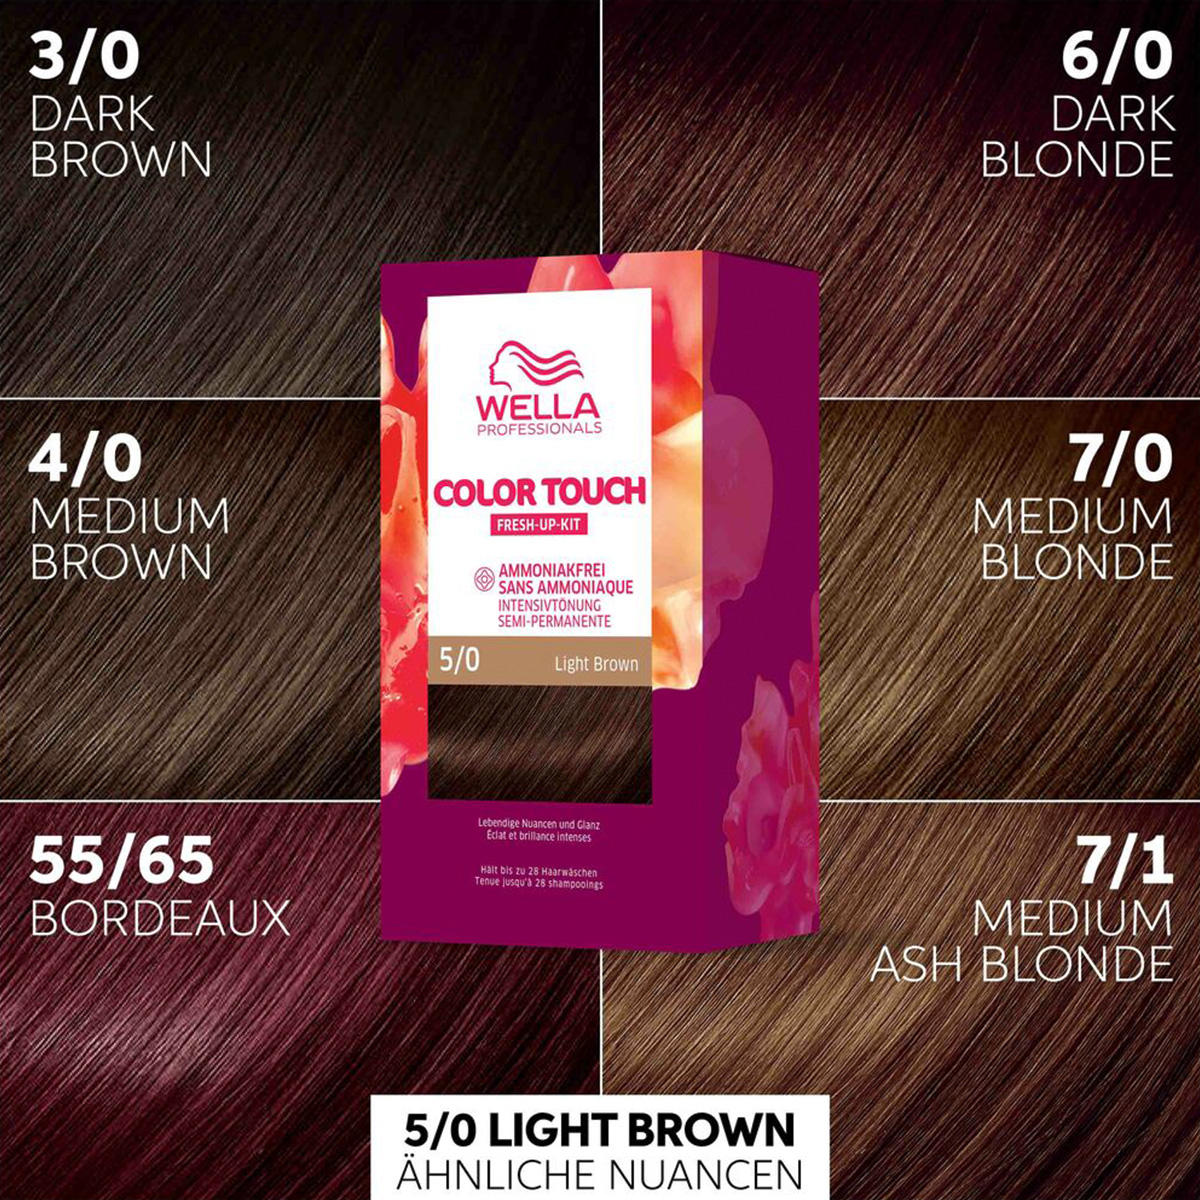 Wella Color Touch Fresh-Up-Kit 5/0 Light Brown - 3